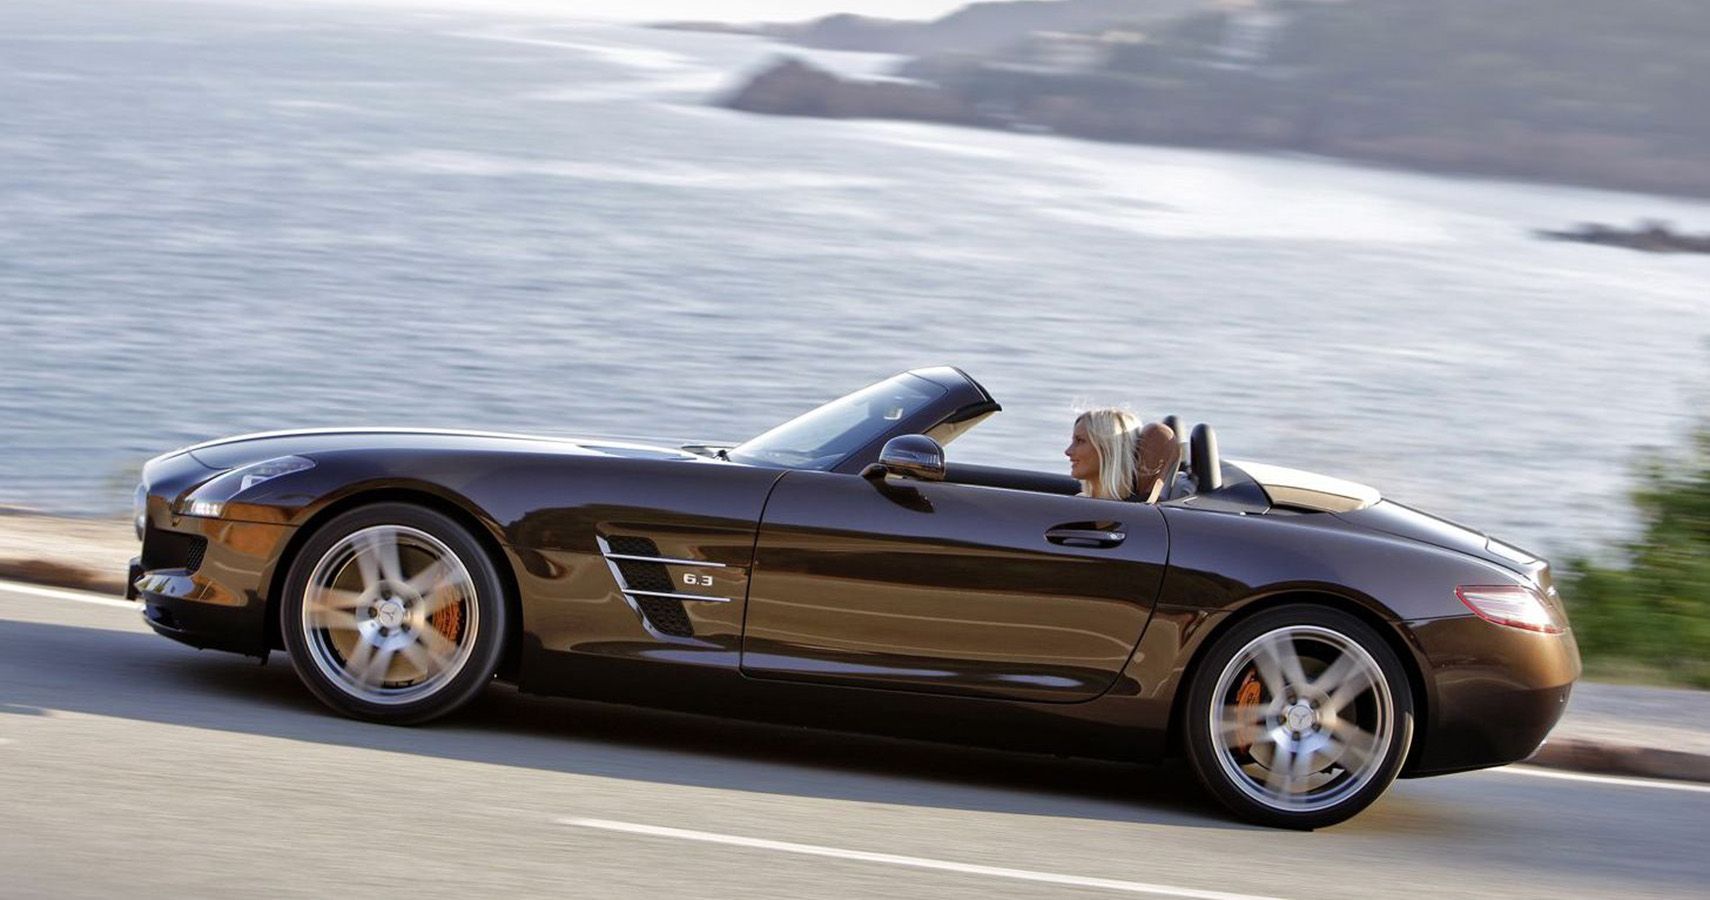 The Mercedes-Benz SLS AMG Is One Car That Is Going To Up In Value In The Coming Years So If You Have The Wherewithal To Get One Today